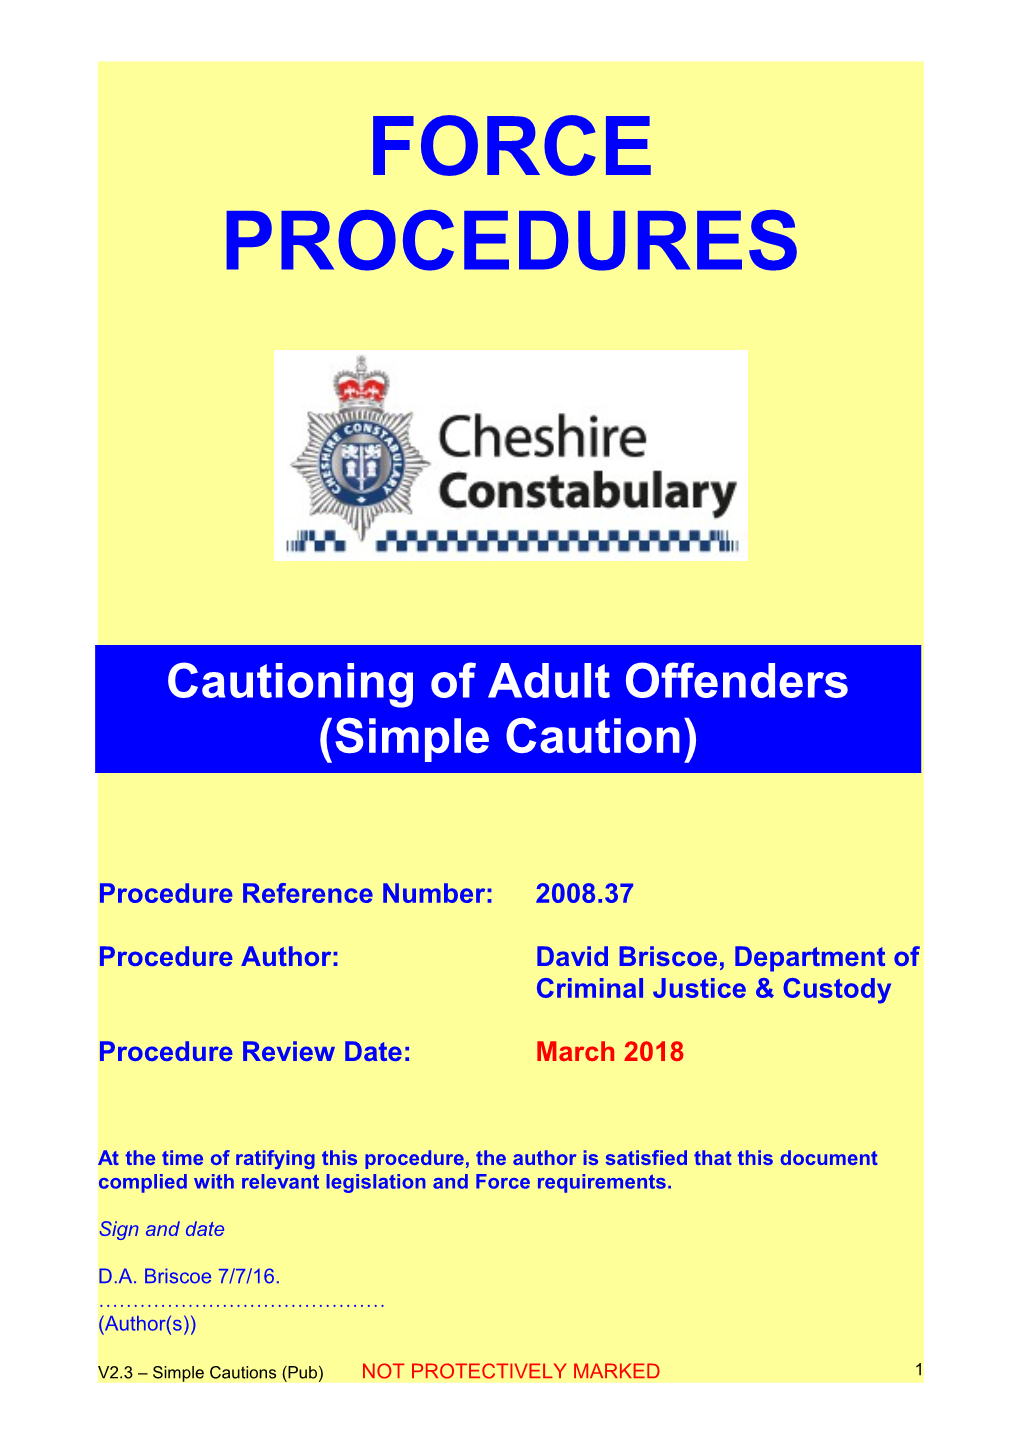 Cautioning of Adult Offenders (Simple Cautions)